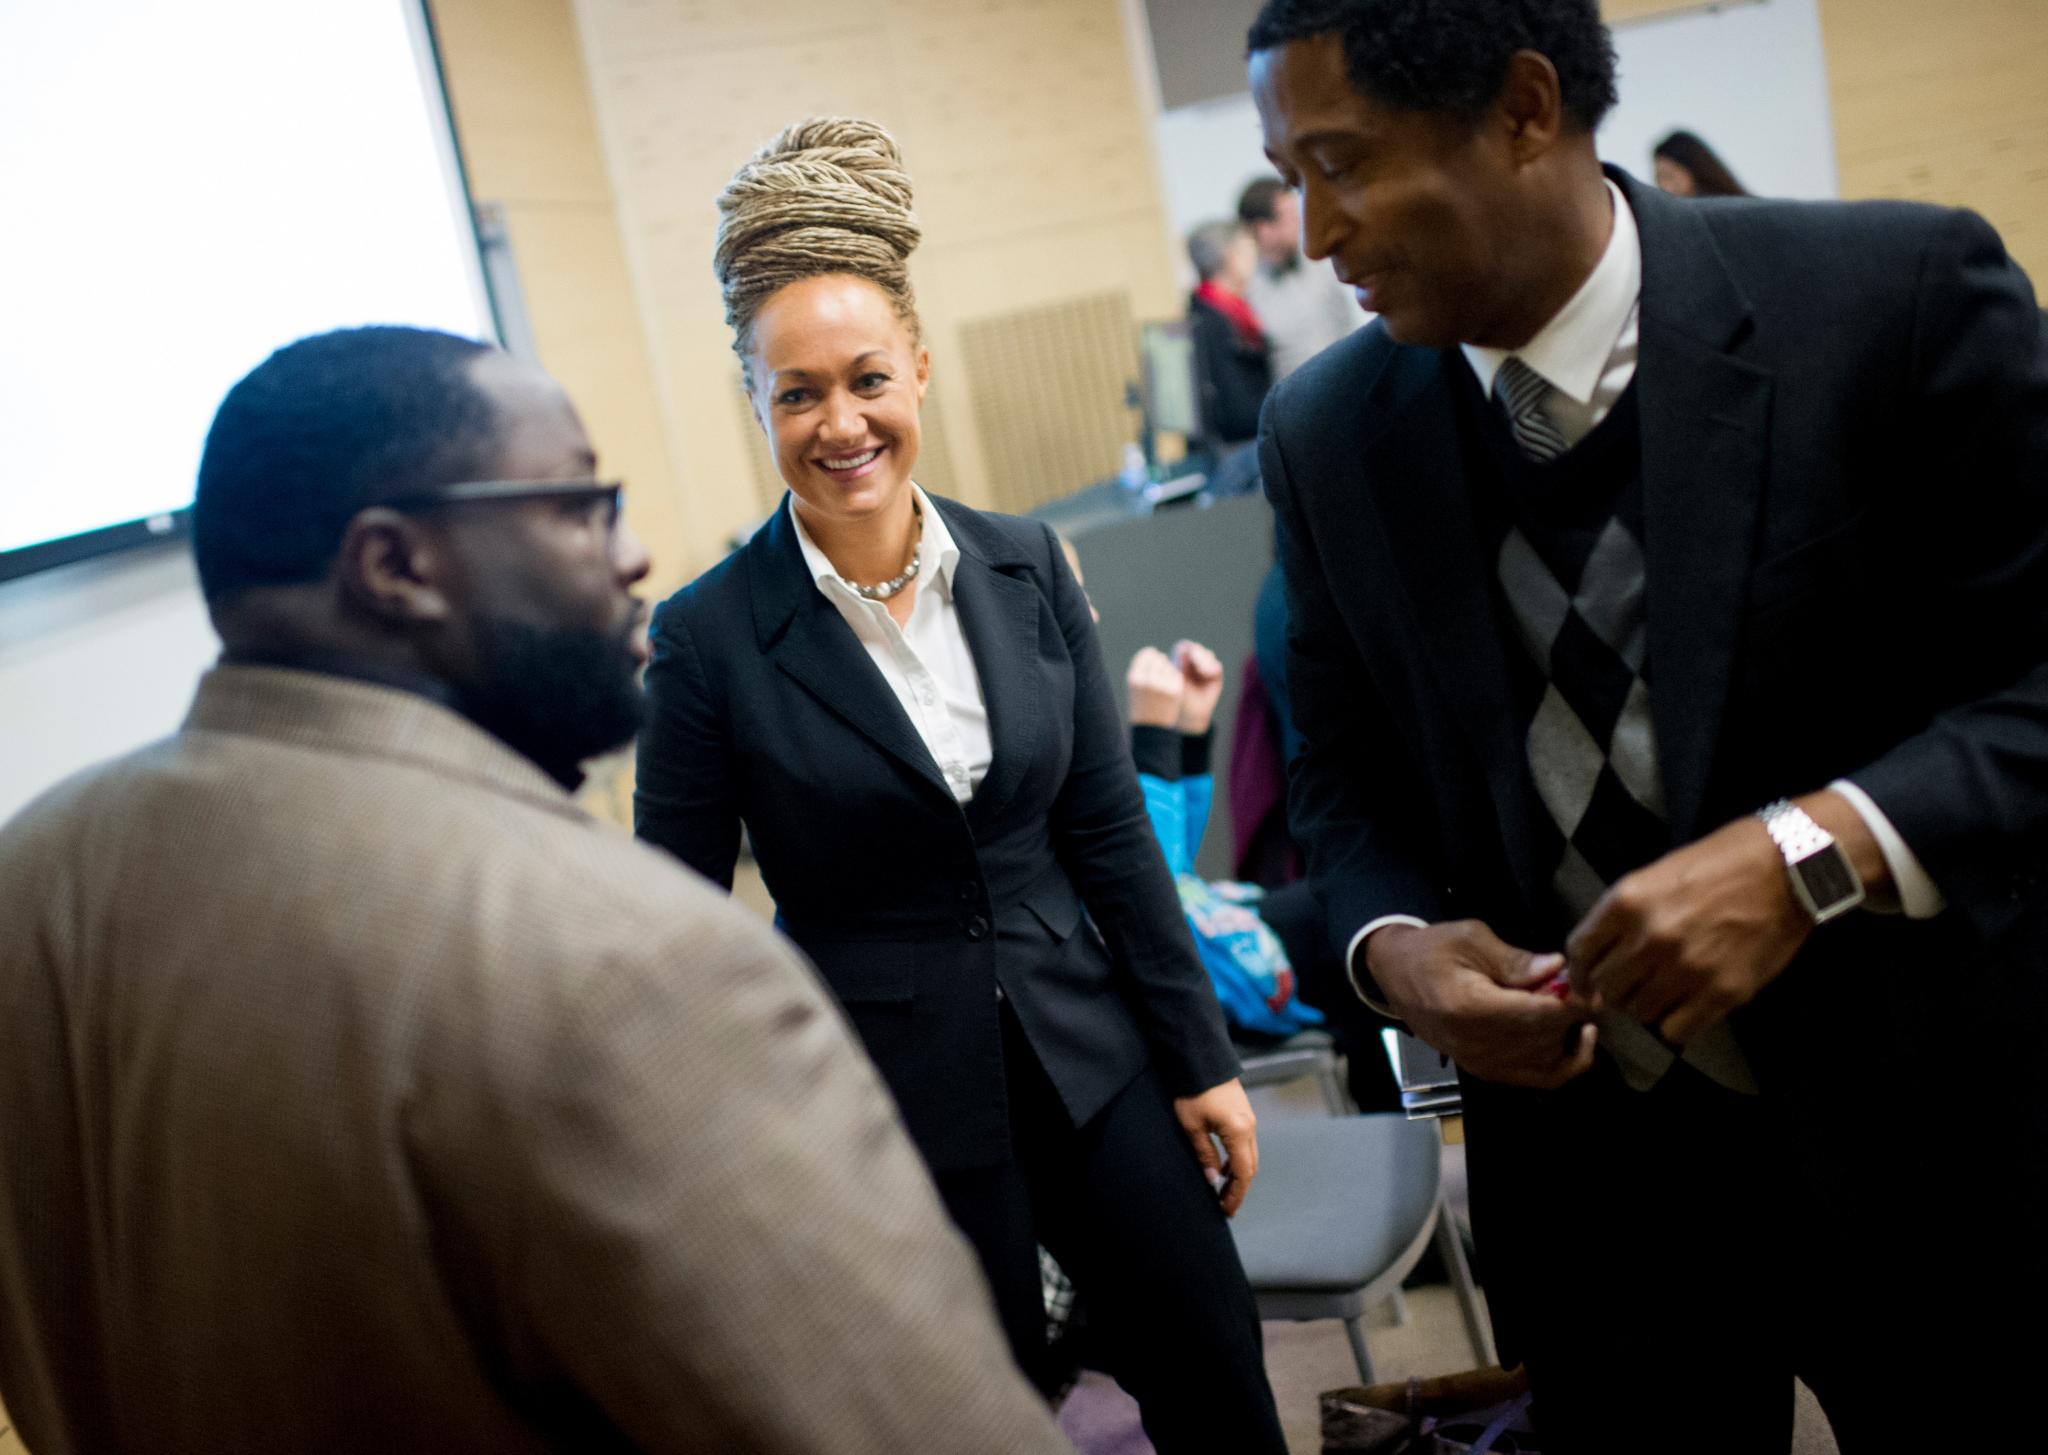 NAACP: 'We Stand Behind Rachel Dolezal's Advocacy Record'